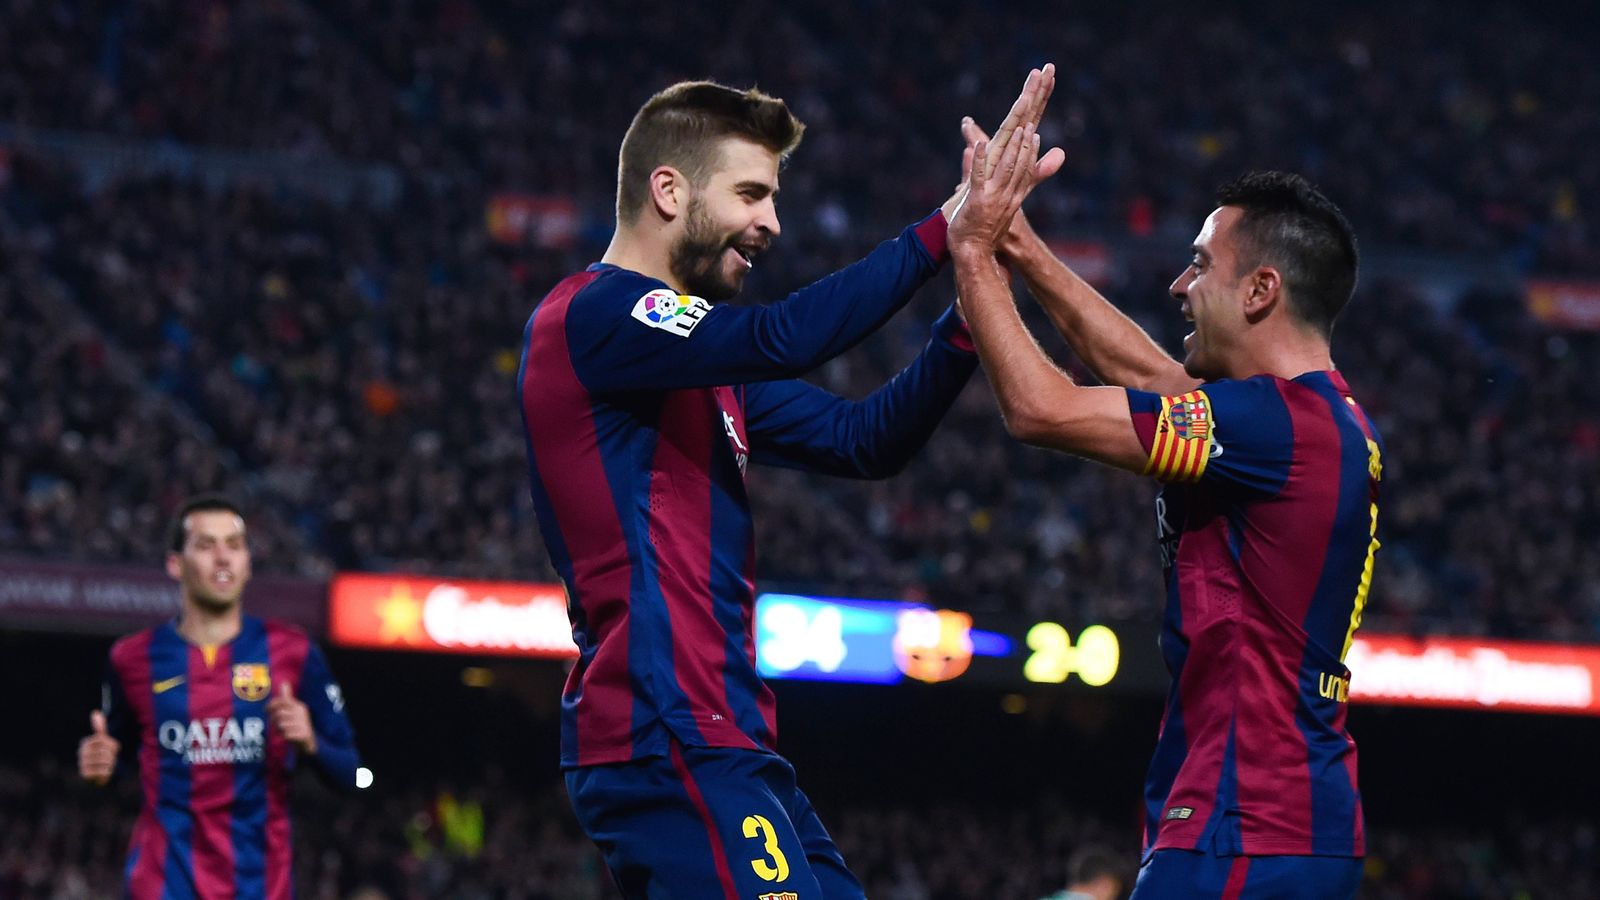 Gerard Pique warned by former teammate and coach xavi that his services were not needed in Barcelona anymore